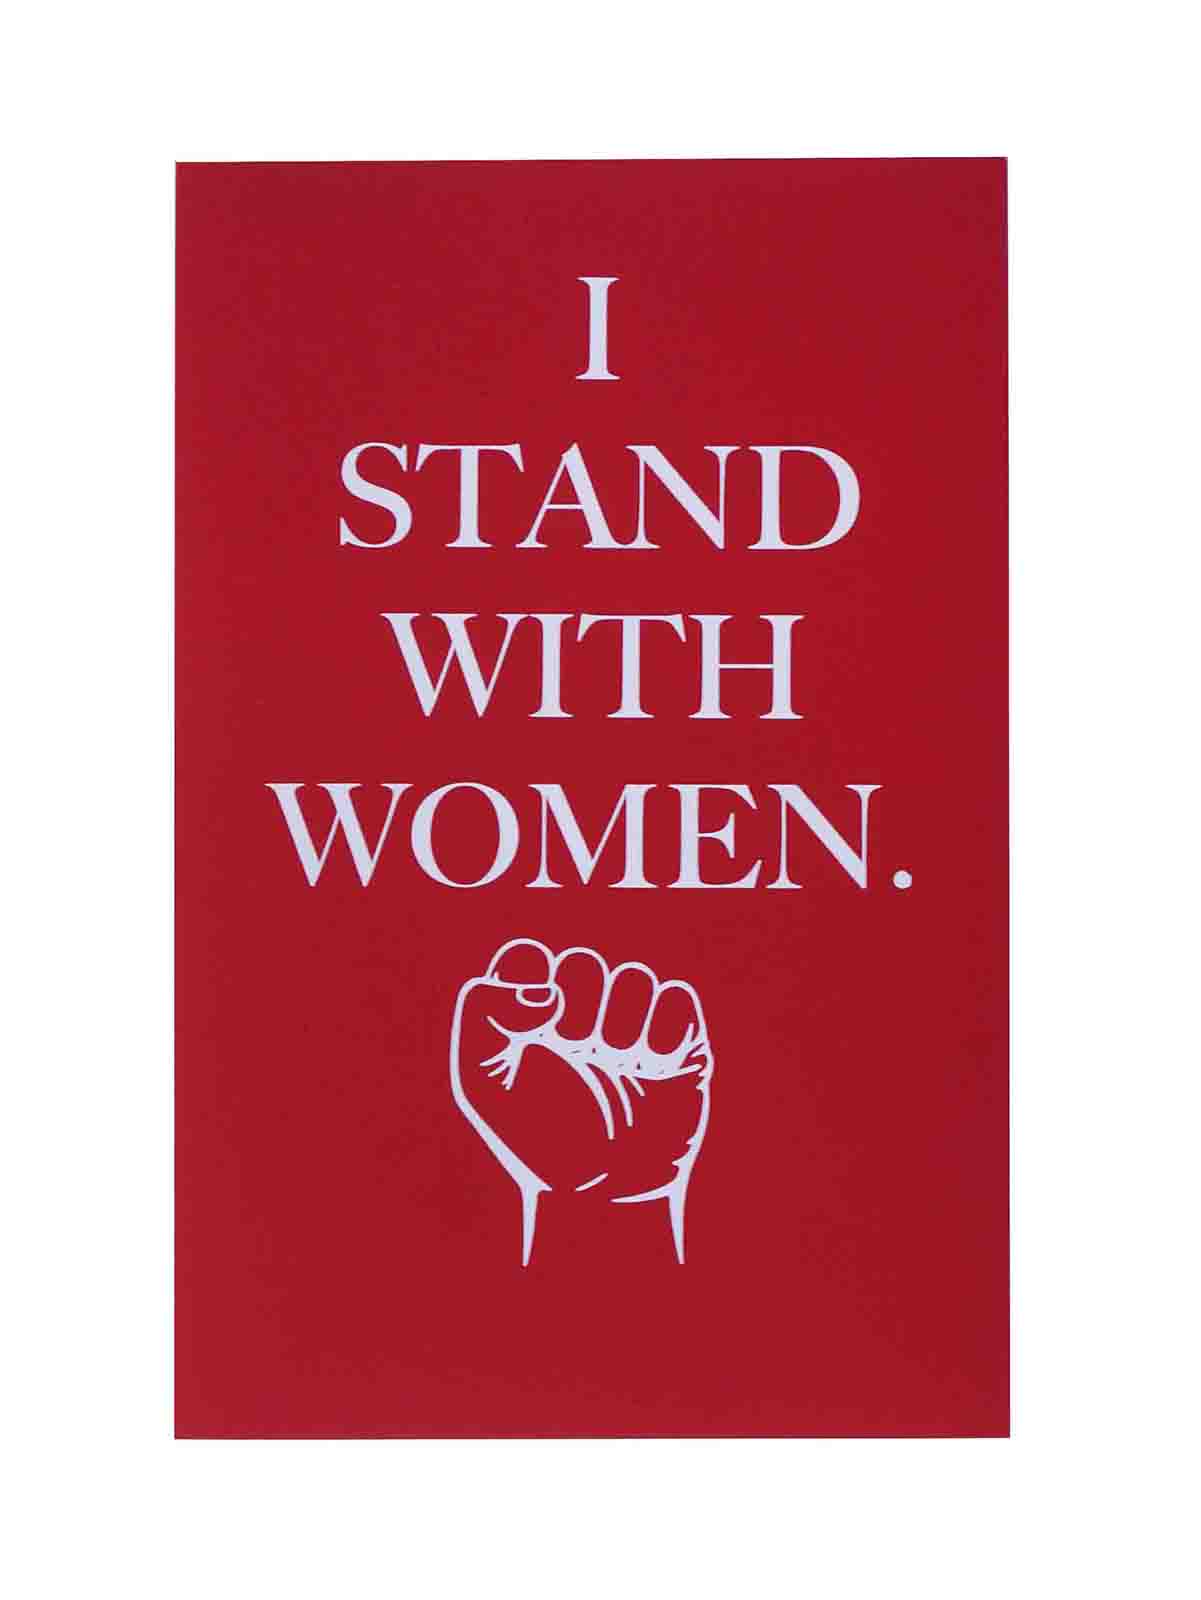 Ape_Bleakney_'I Stand With Women' Women's March Poster on Construction Electric Red, 12.5''x19''.jpg